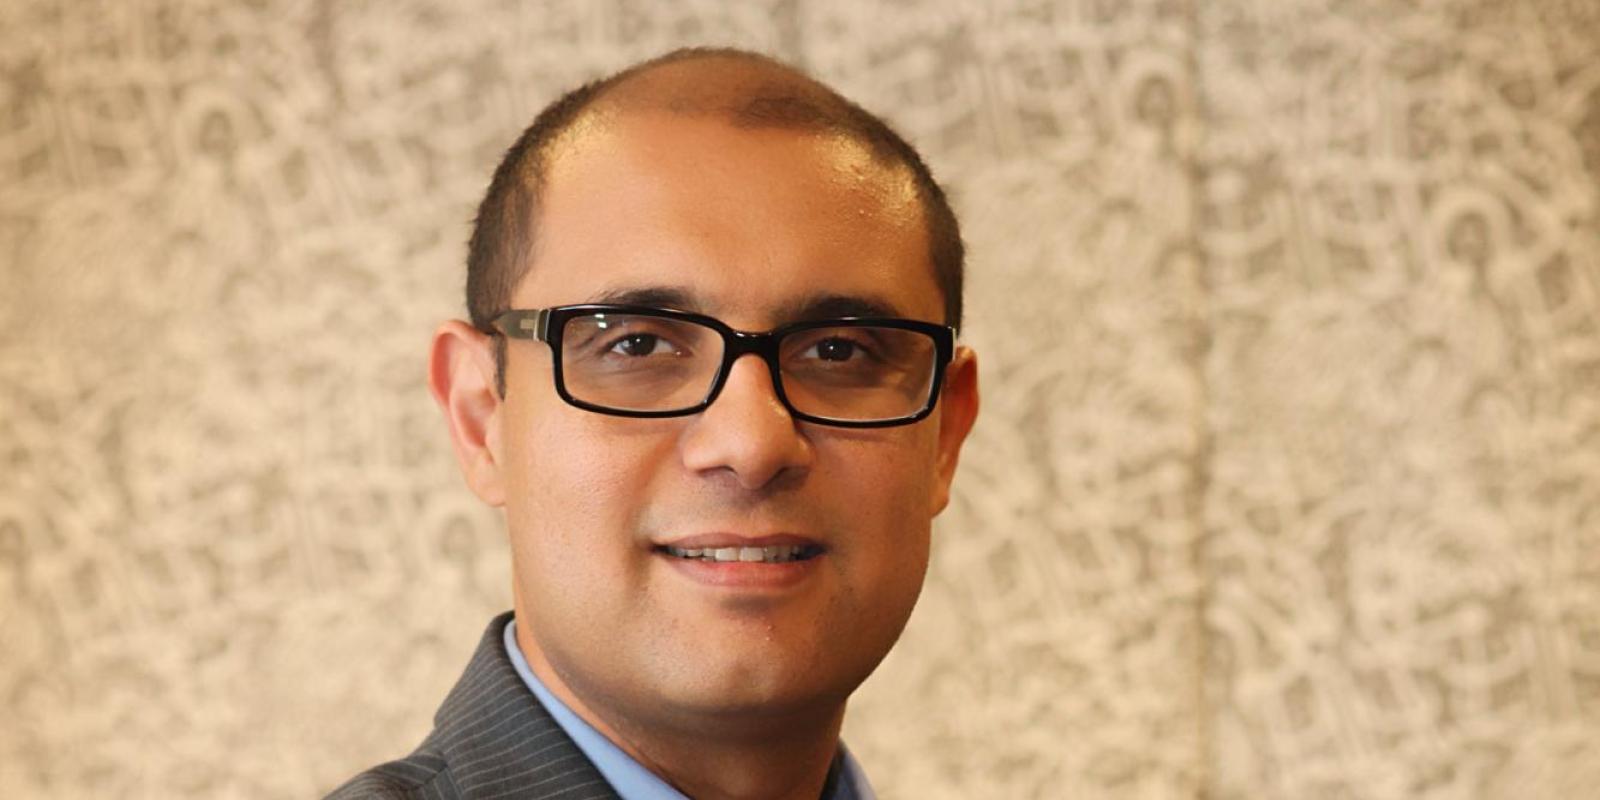 Ahmed Tolba is the new Associate Provost for Strategic Enrollment Management